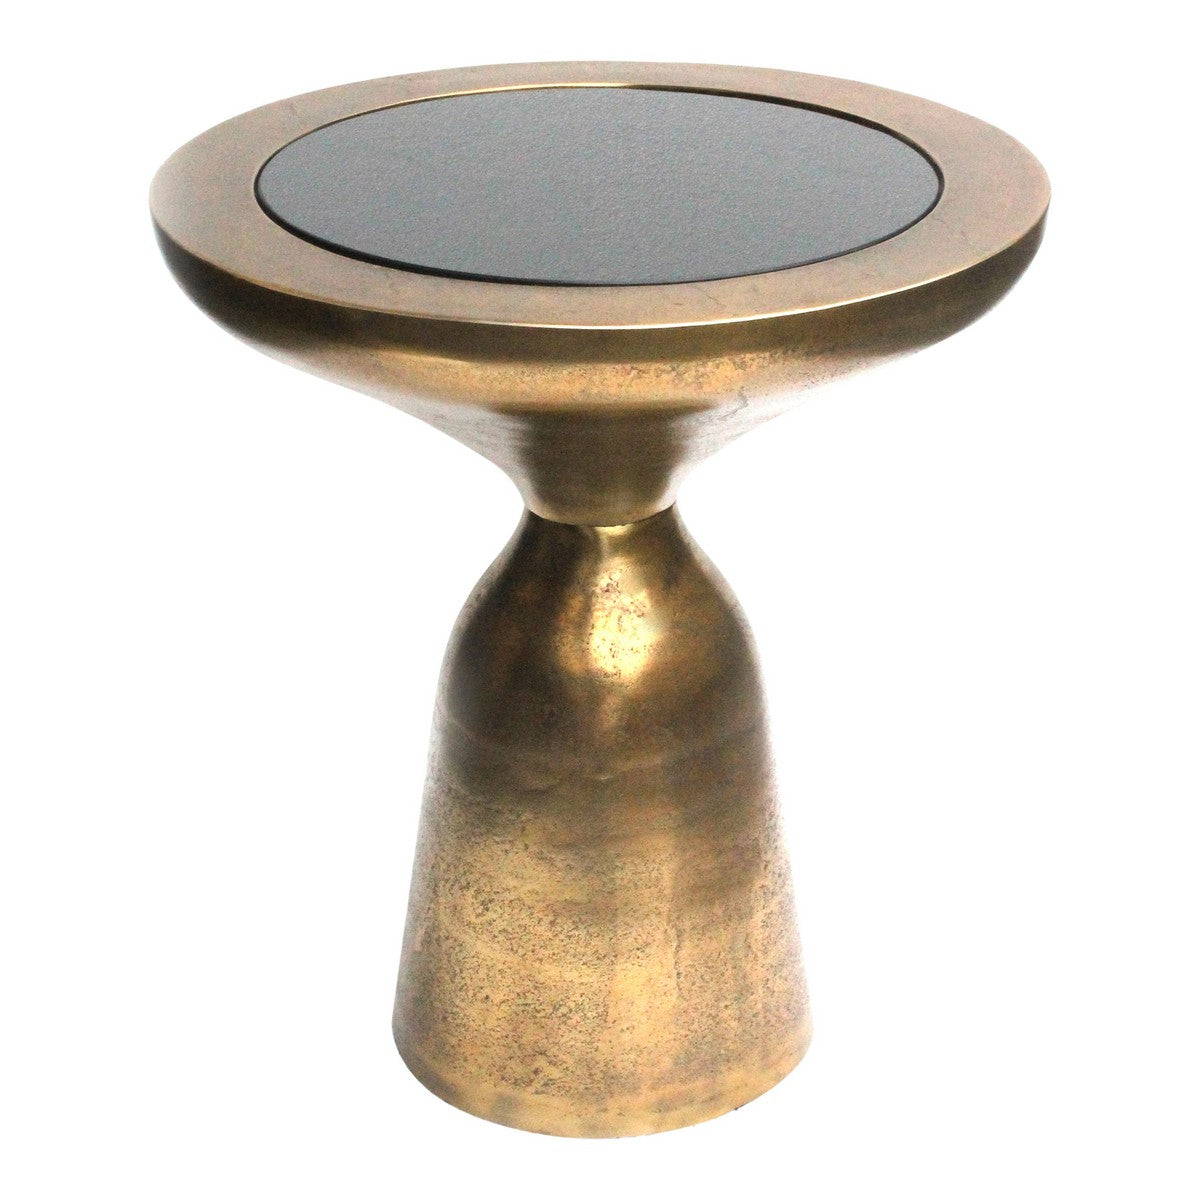 Moe's Home Collection Oracle Accent Table Large Antique Brass - QK-1022-51